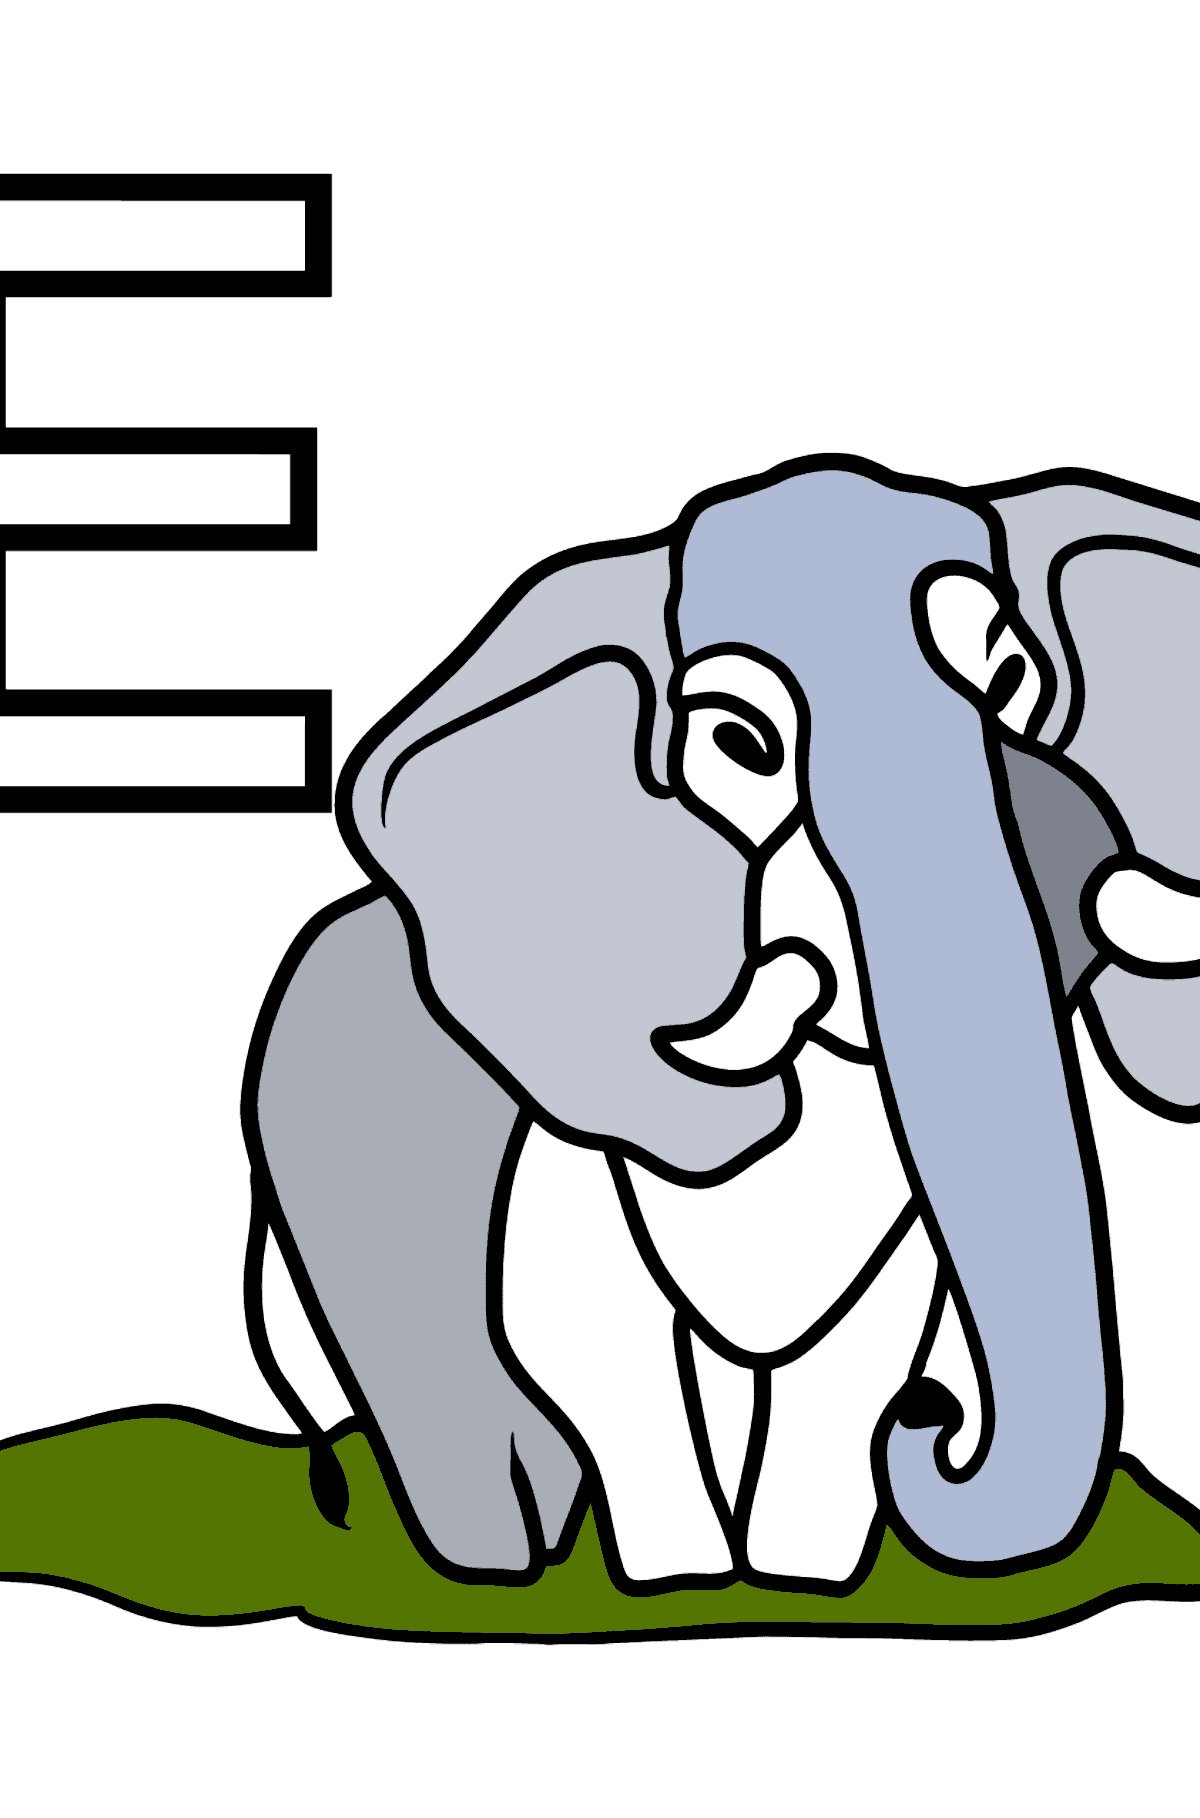 English Letter E coloring pages - ELEPHANT - Coloring Pages for Kids